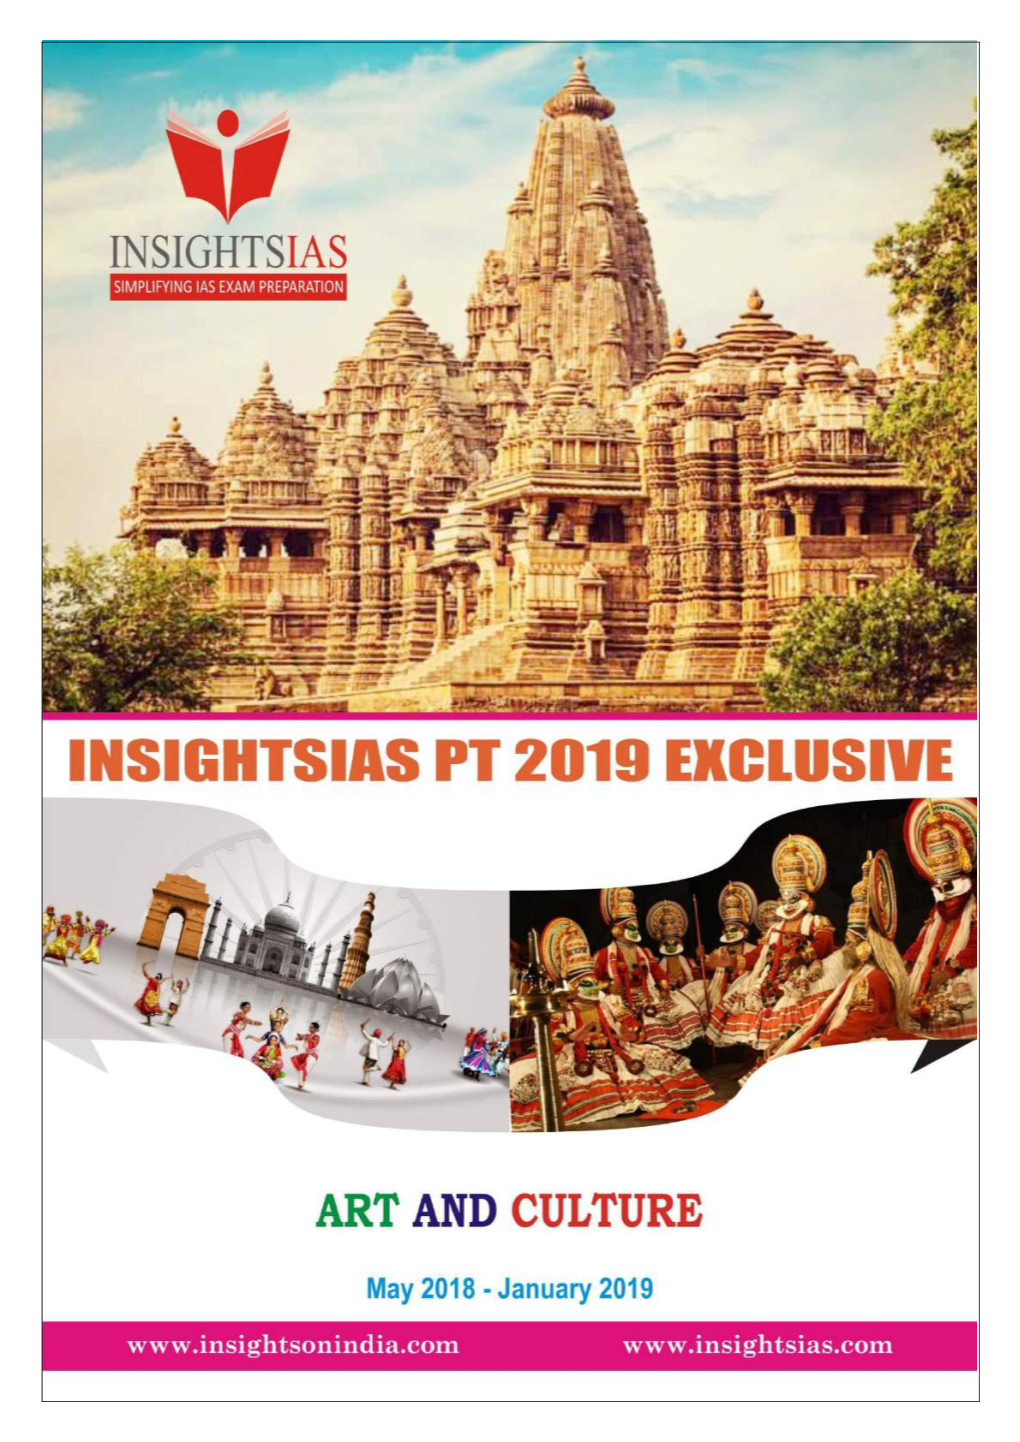 Insights Pt 2019 Exclusive (Art and Culture)